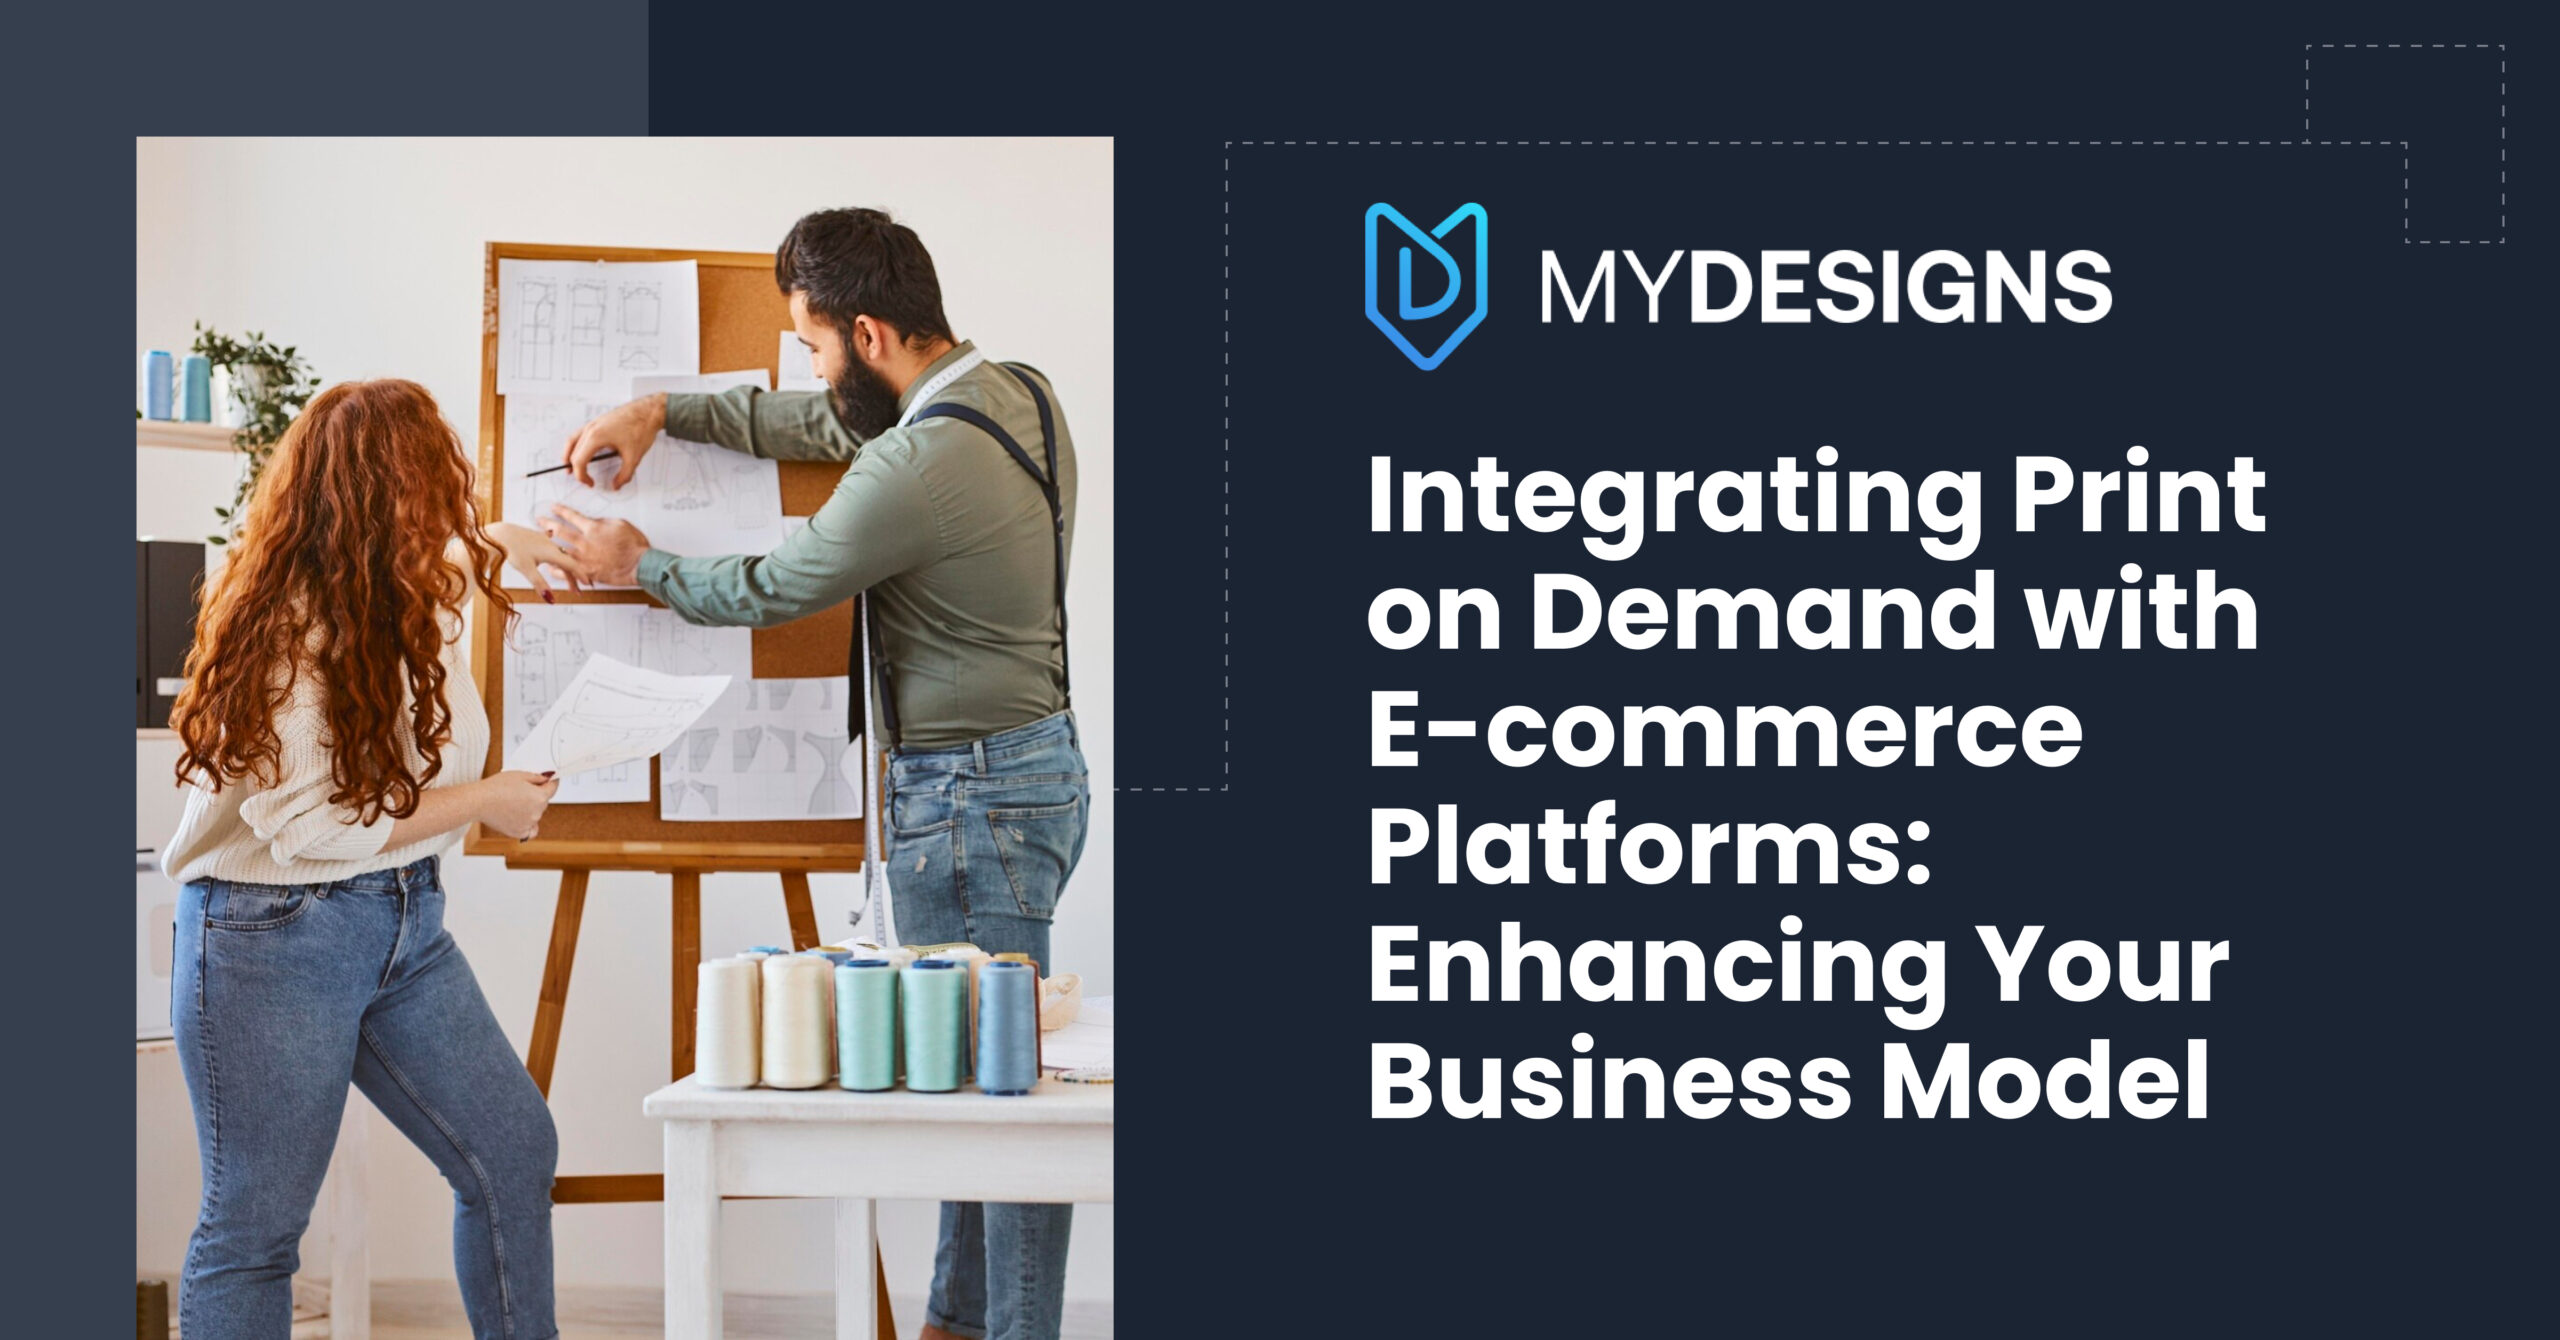 Integrating Print on Demand with E-commerce Platforms: Enhancing Your Business Model - MyDesigns